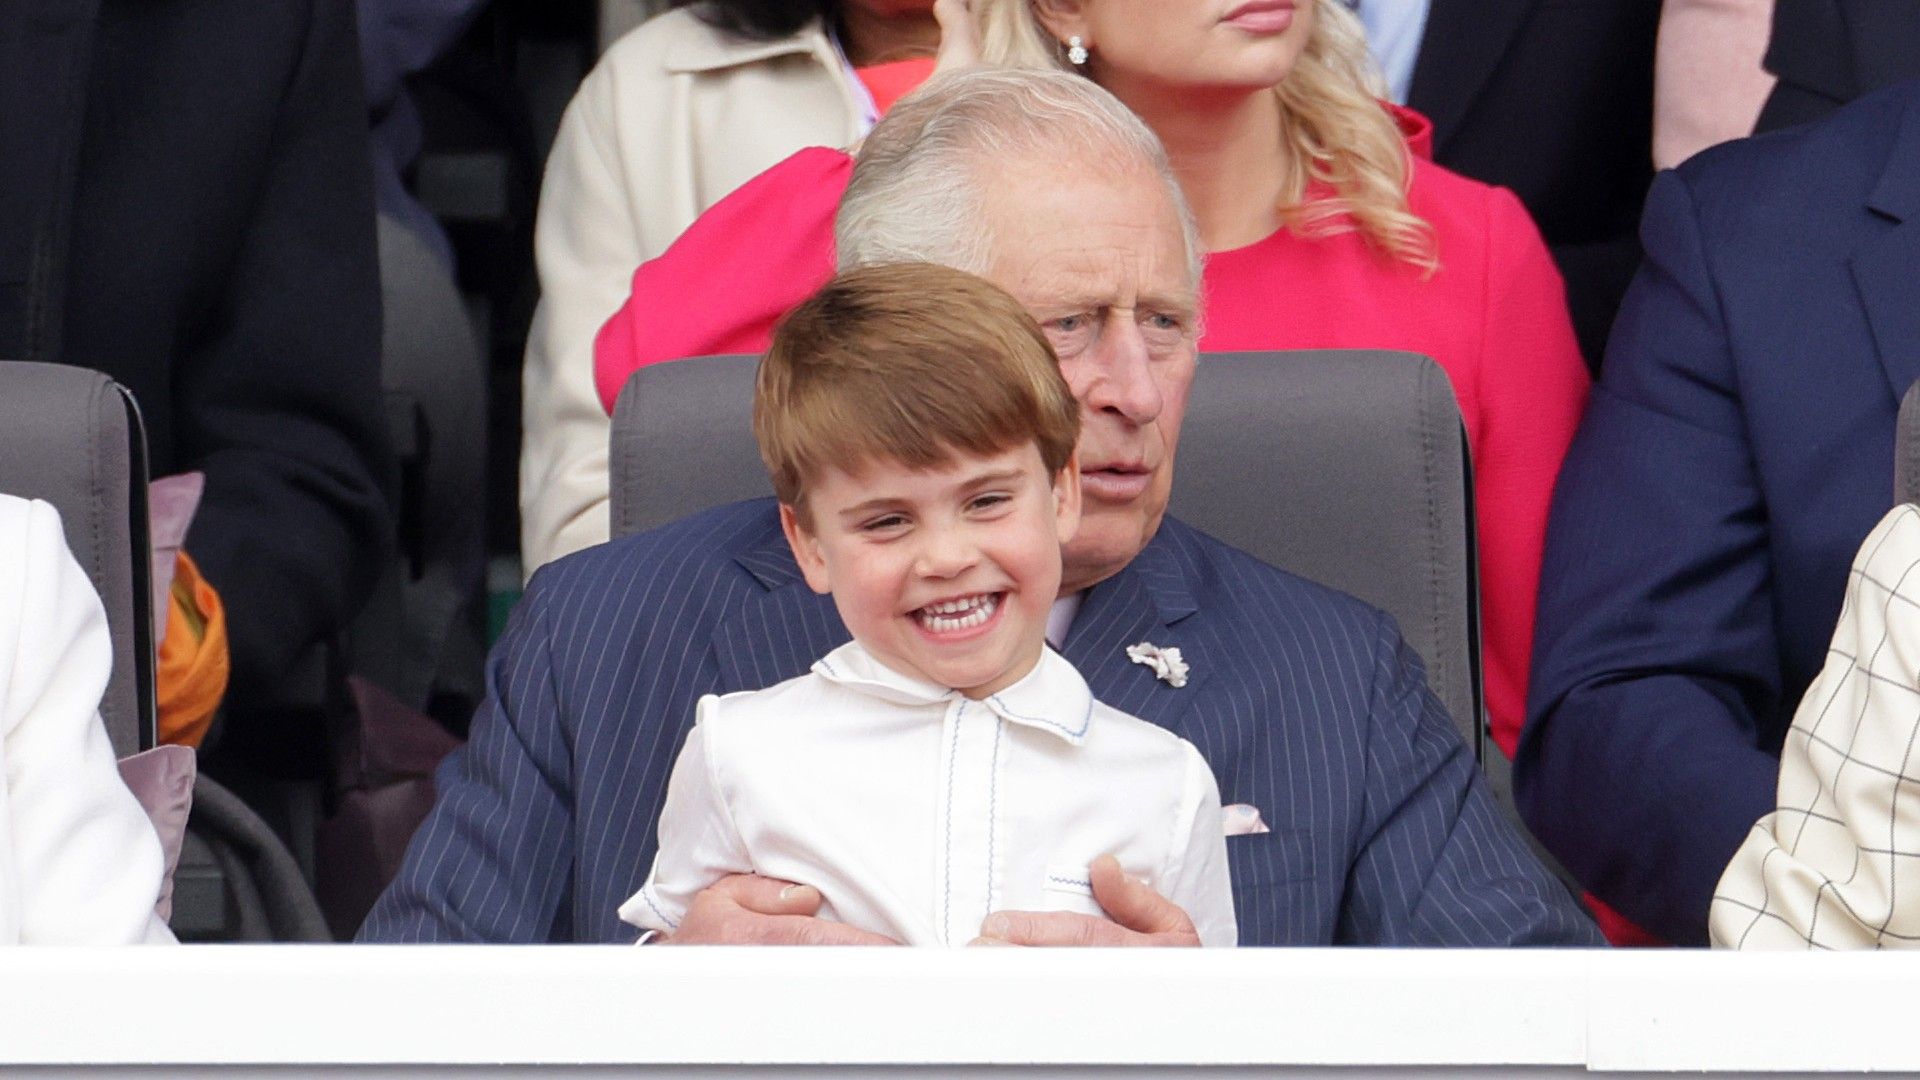 <p>                     He's King Charles III to most people, but to Prince Louis, he's just his grandfather. And the young royal stole hearts - and the show - when he simply couldn't resist sitting on his grandfather's lap during the Platinum Jubilee celebrations in 2022.                    </p>                                      <p>                     It was a touching moment and captured King Charles's special bond with his grandchildren.                    </p>                                      <p>                     In 2013, King Charles opened up about how he feels about being a grandparent. Speaking with <a href="https://www.telegraph.co.uk/news/uknews/prince-charles/10162843/Prince-of-Wales-asks-for-grandparenting-tips.html">the Telegraph</a>, he said that being a grandparent is a "different part of your life."                   </p>                                      <p>                     He added, "Show them things to take their interest. My grandmother did that; she was wonderful. It is very important to create a bond when they are very young."                   </p>